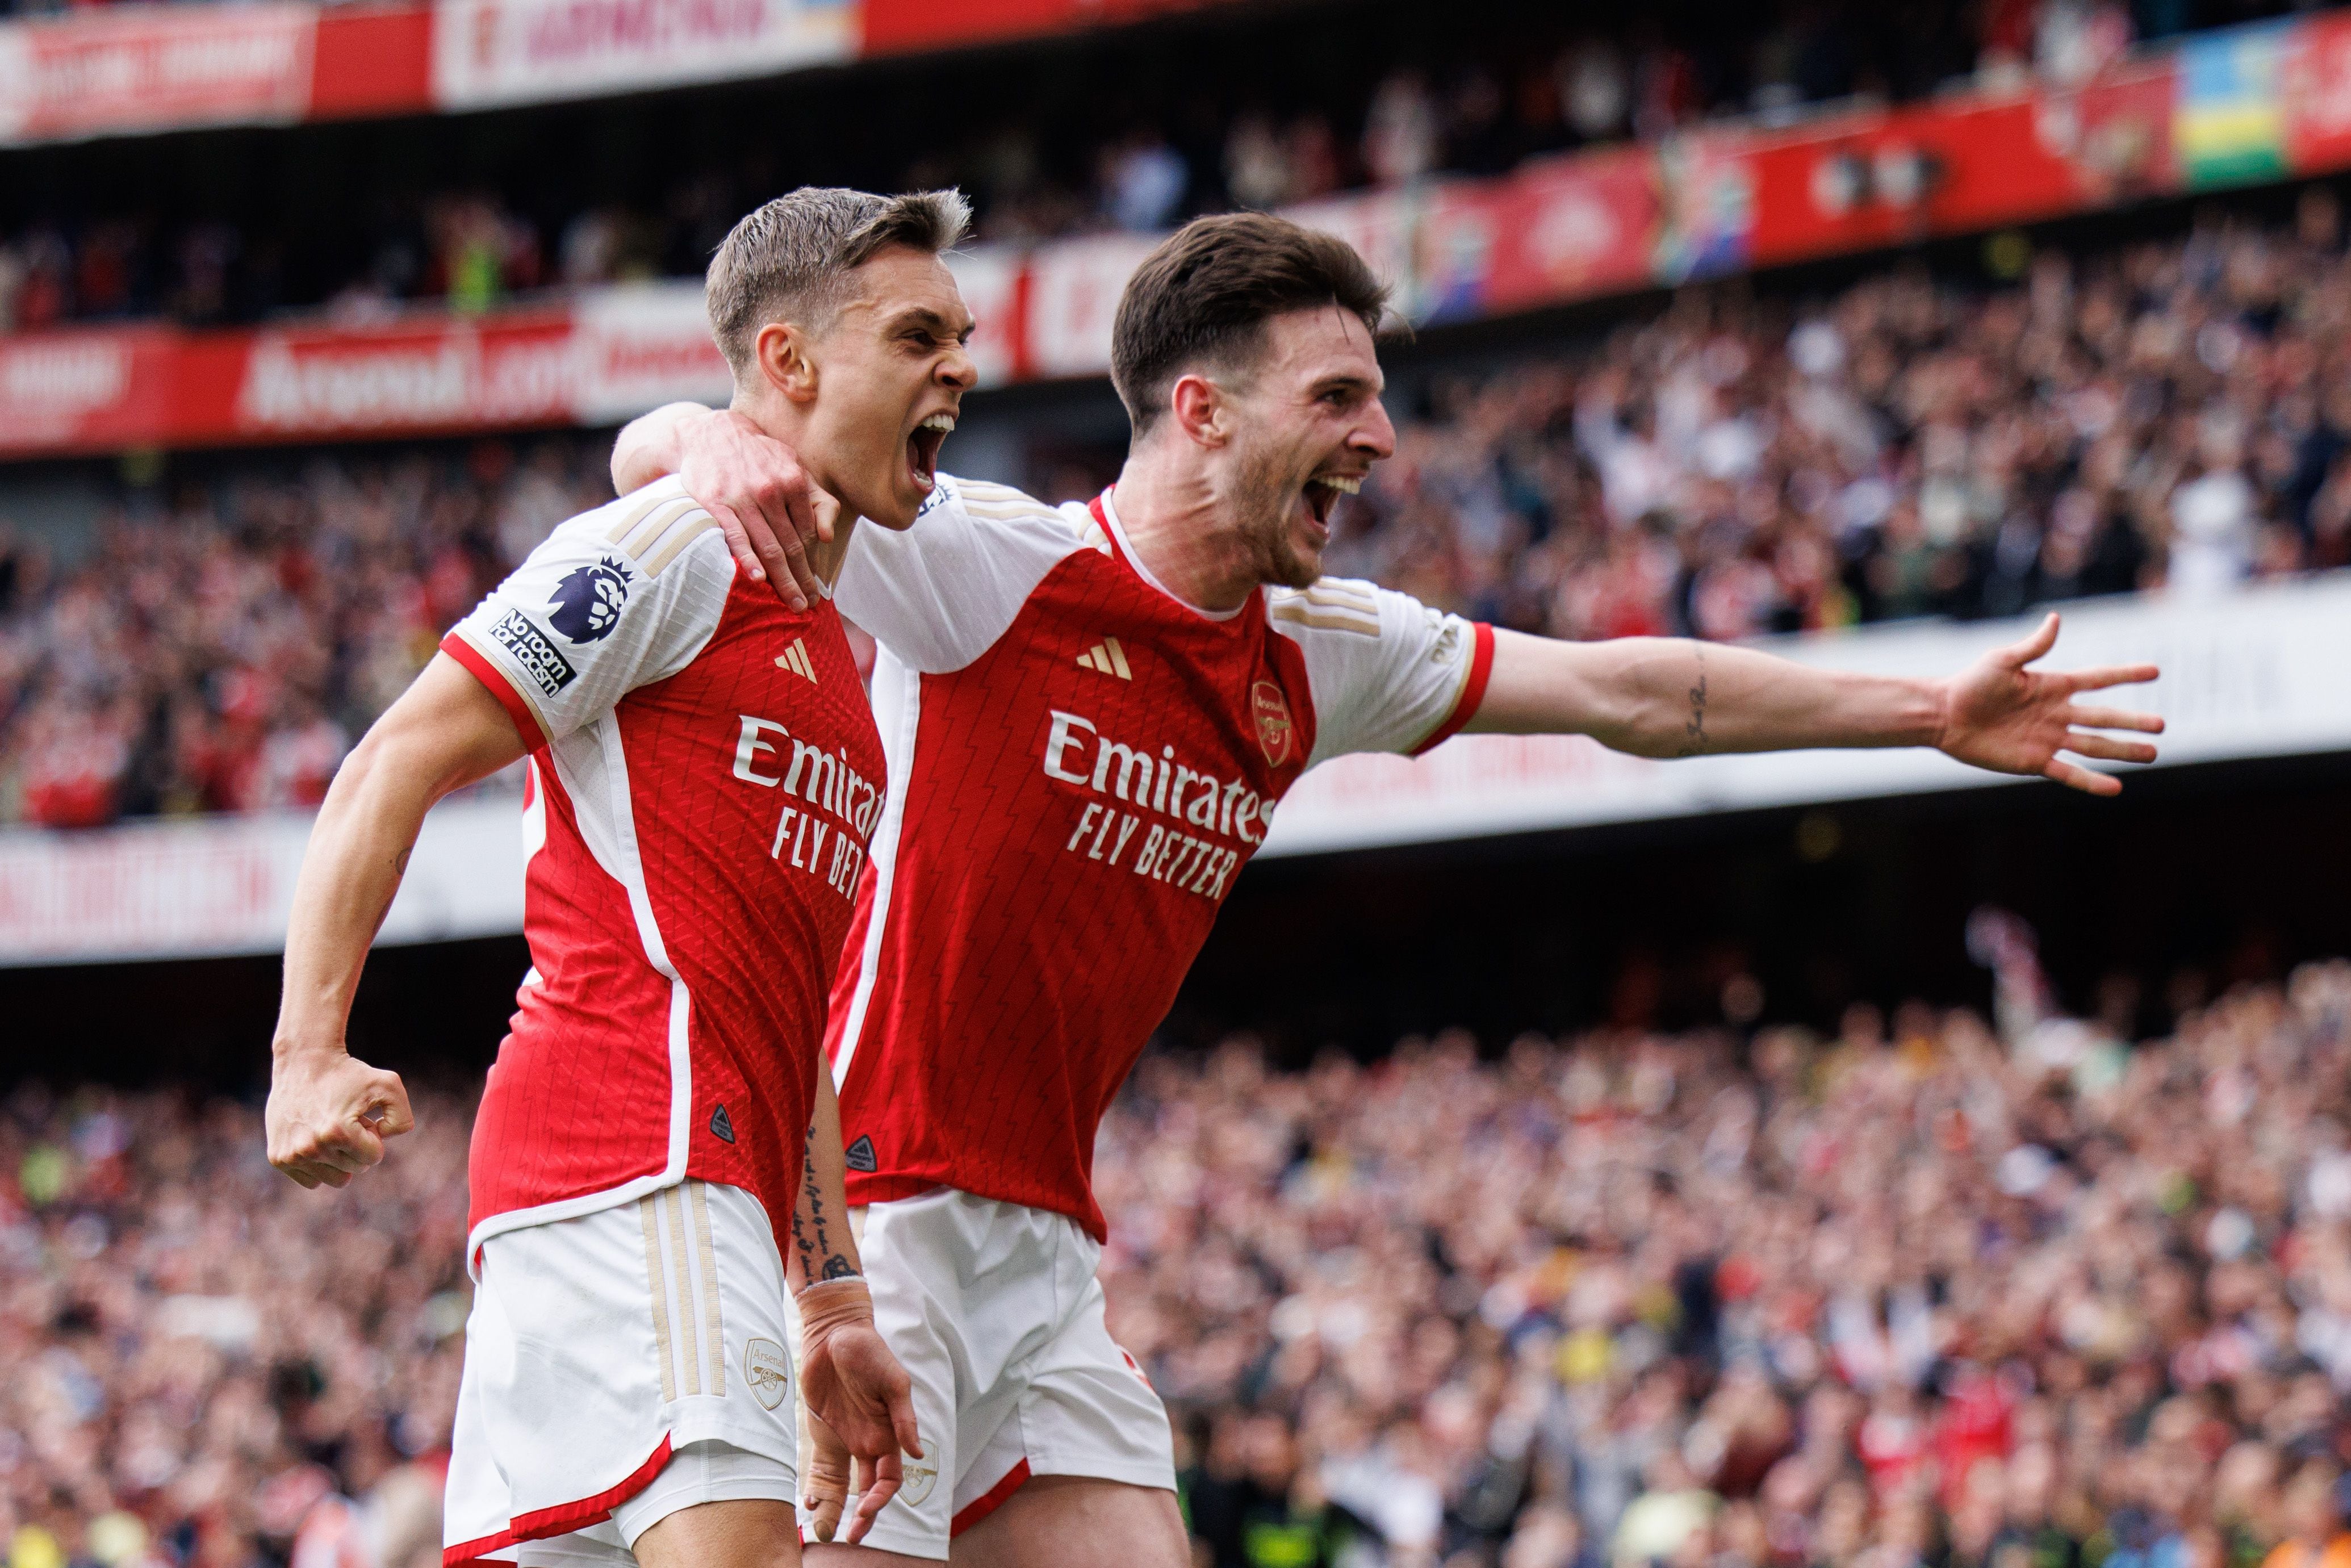 arsenal beat bournemouth to keep pressure on man city in premier league title race